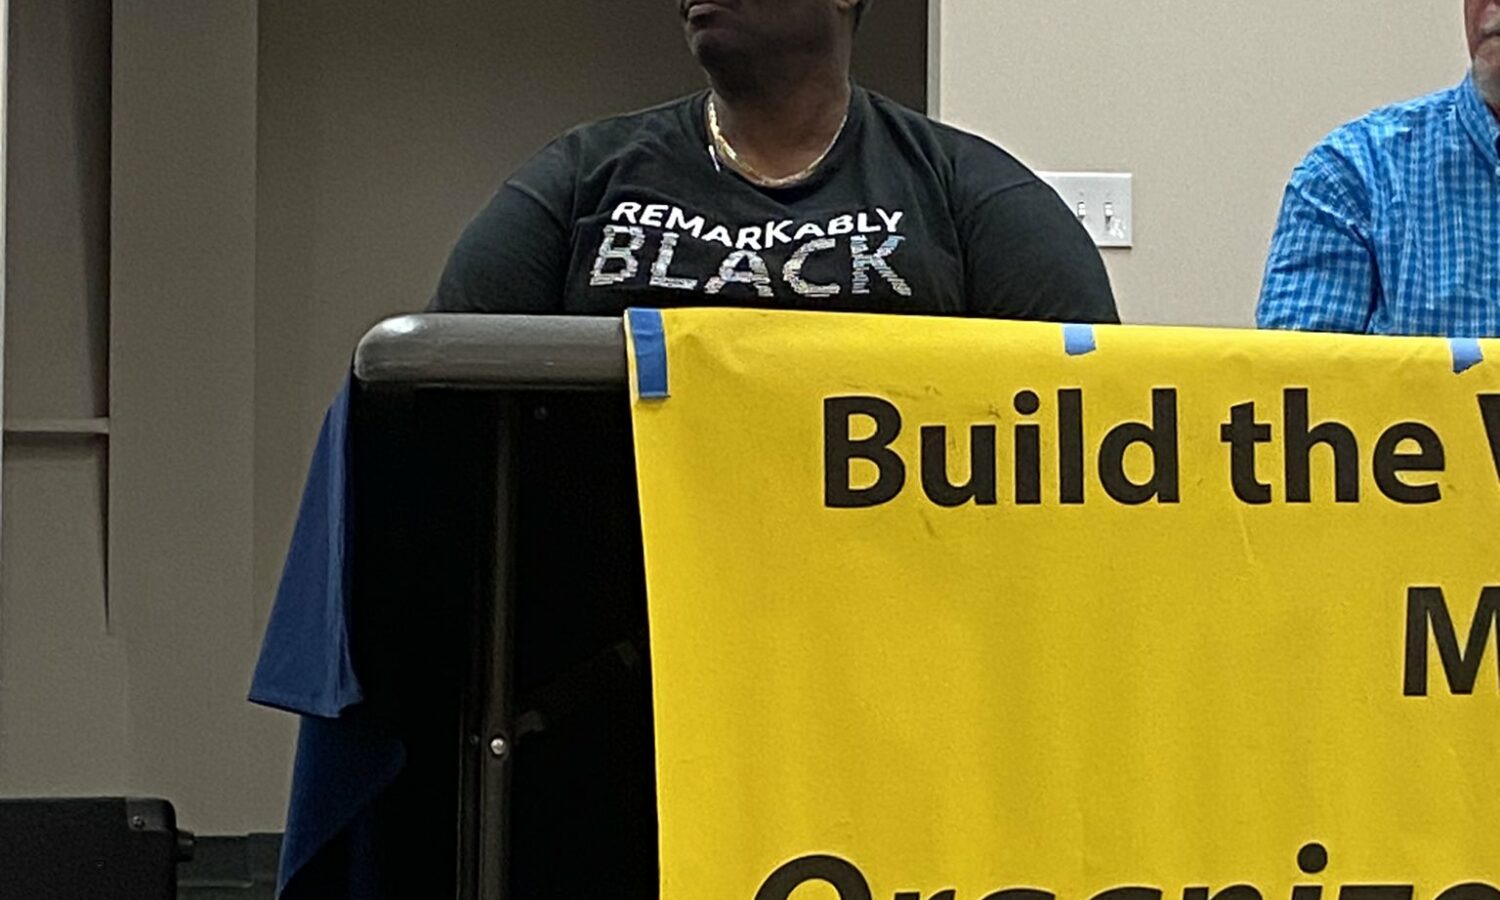 Dion Coutrier, worker organizer and former CLT4 (an Amazon fulfillment center in Charlotte) worker